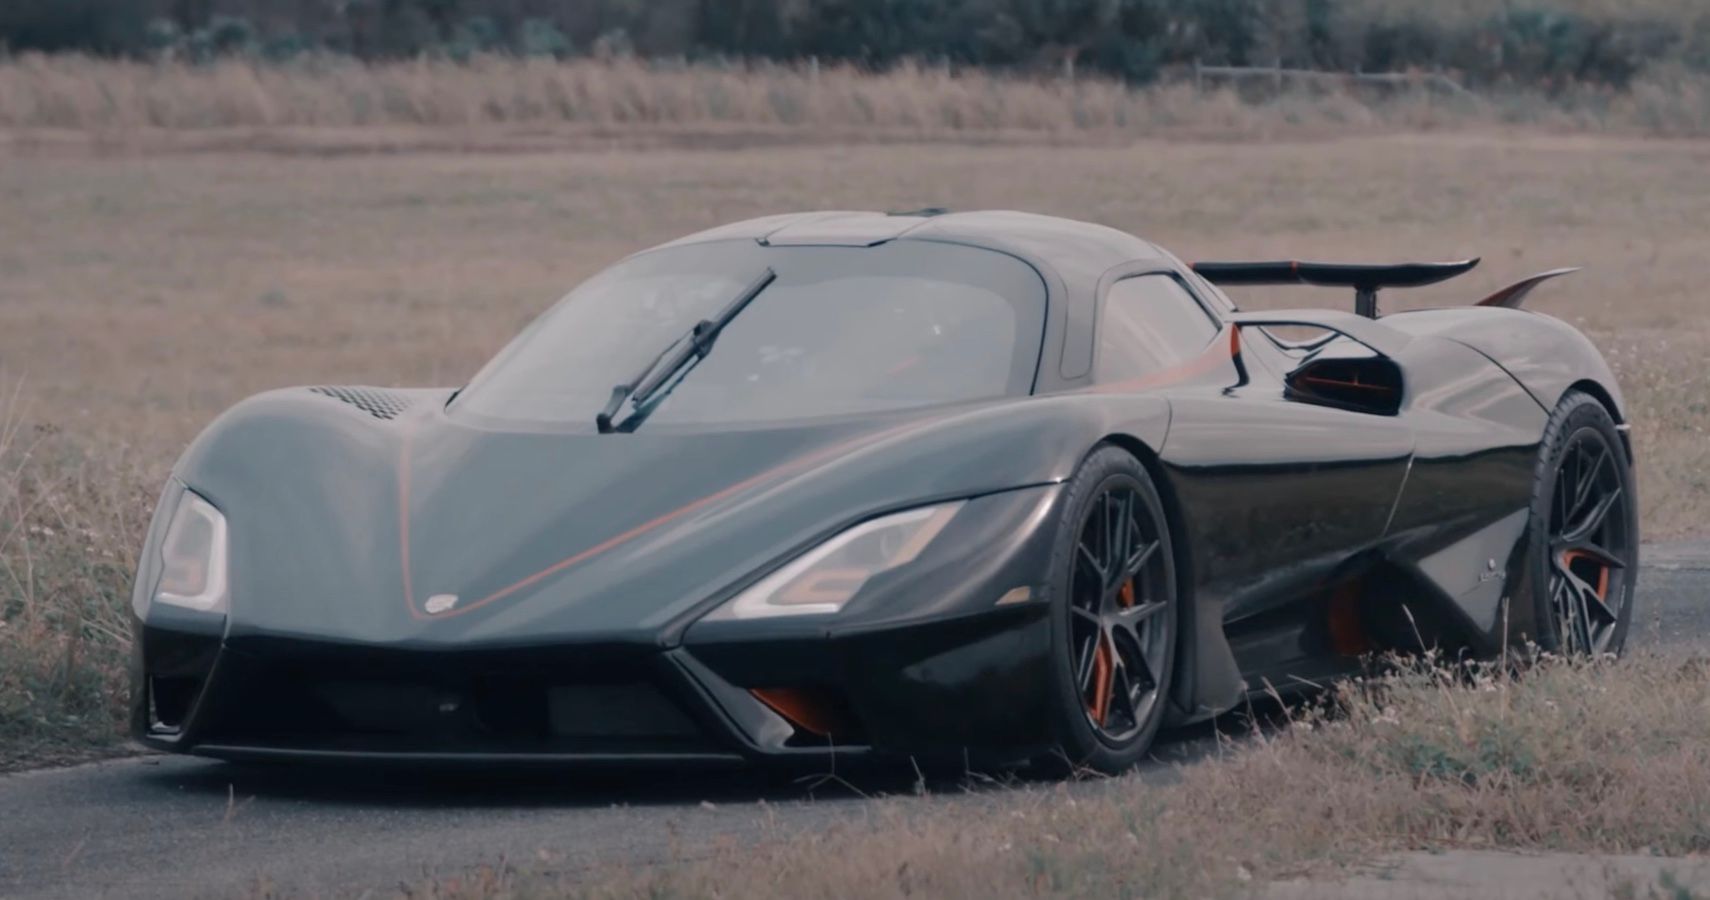 SSC Tuatara Accelerates To Record-Breaking 282.9 MPH Seizing Fastest Production Car Title